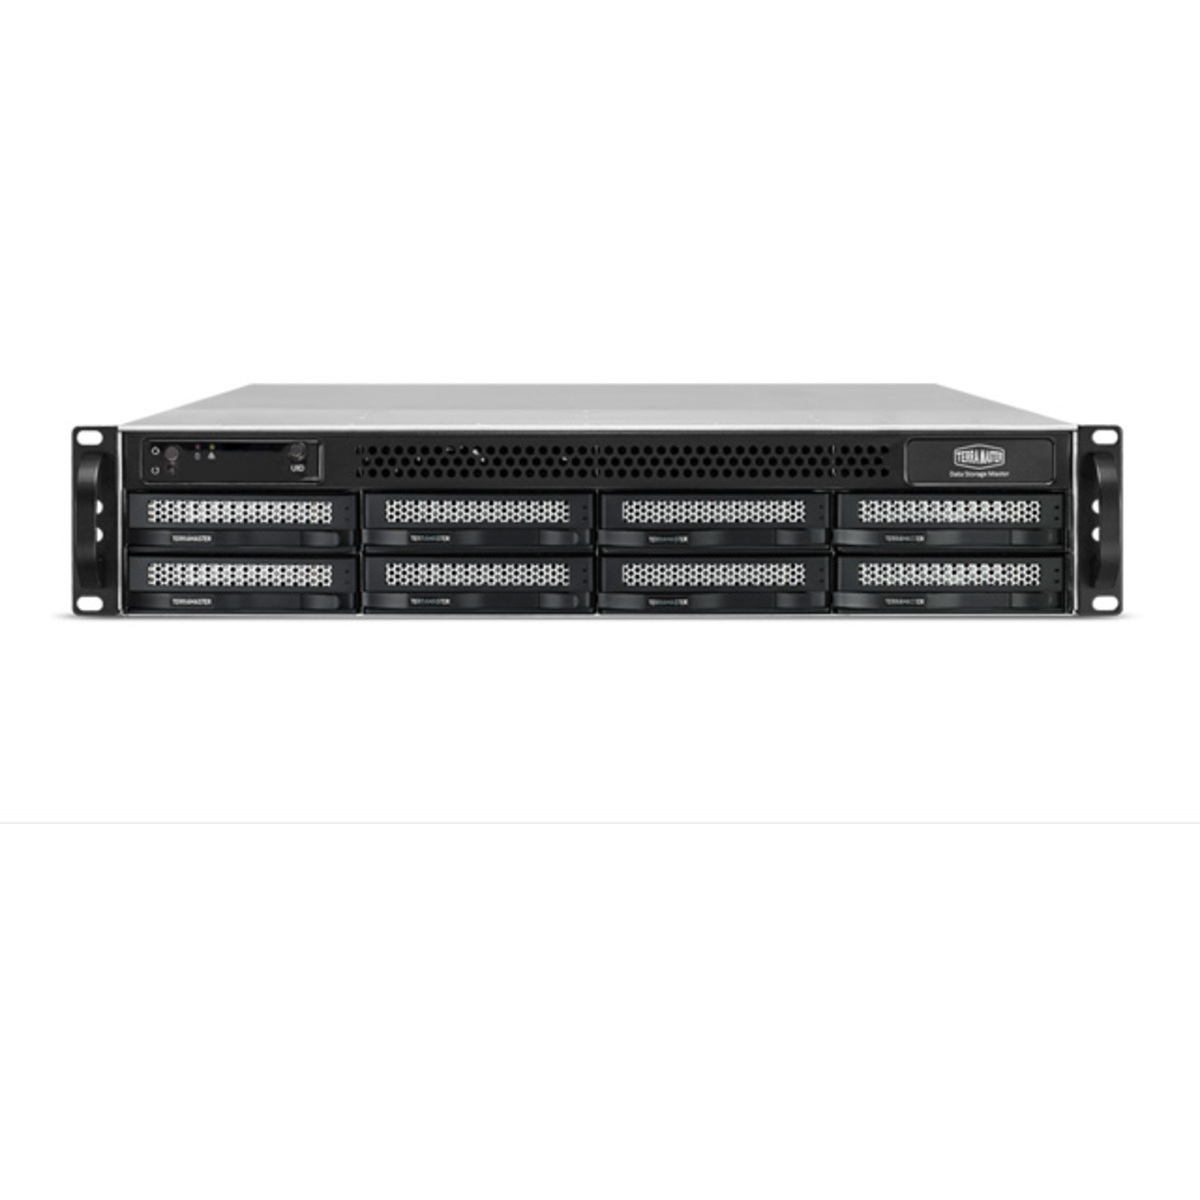 TerraMaster U8-423 RackMount NAS - Network Attached Storage Device Burn-In Tested Configurations - FREE RAM UPGRADE - nas headquarters buy network attached storage server device das new raid-5 free shipping usa spring sale U8-423